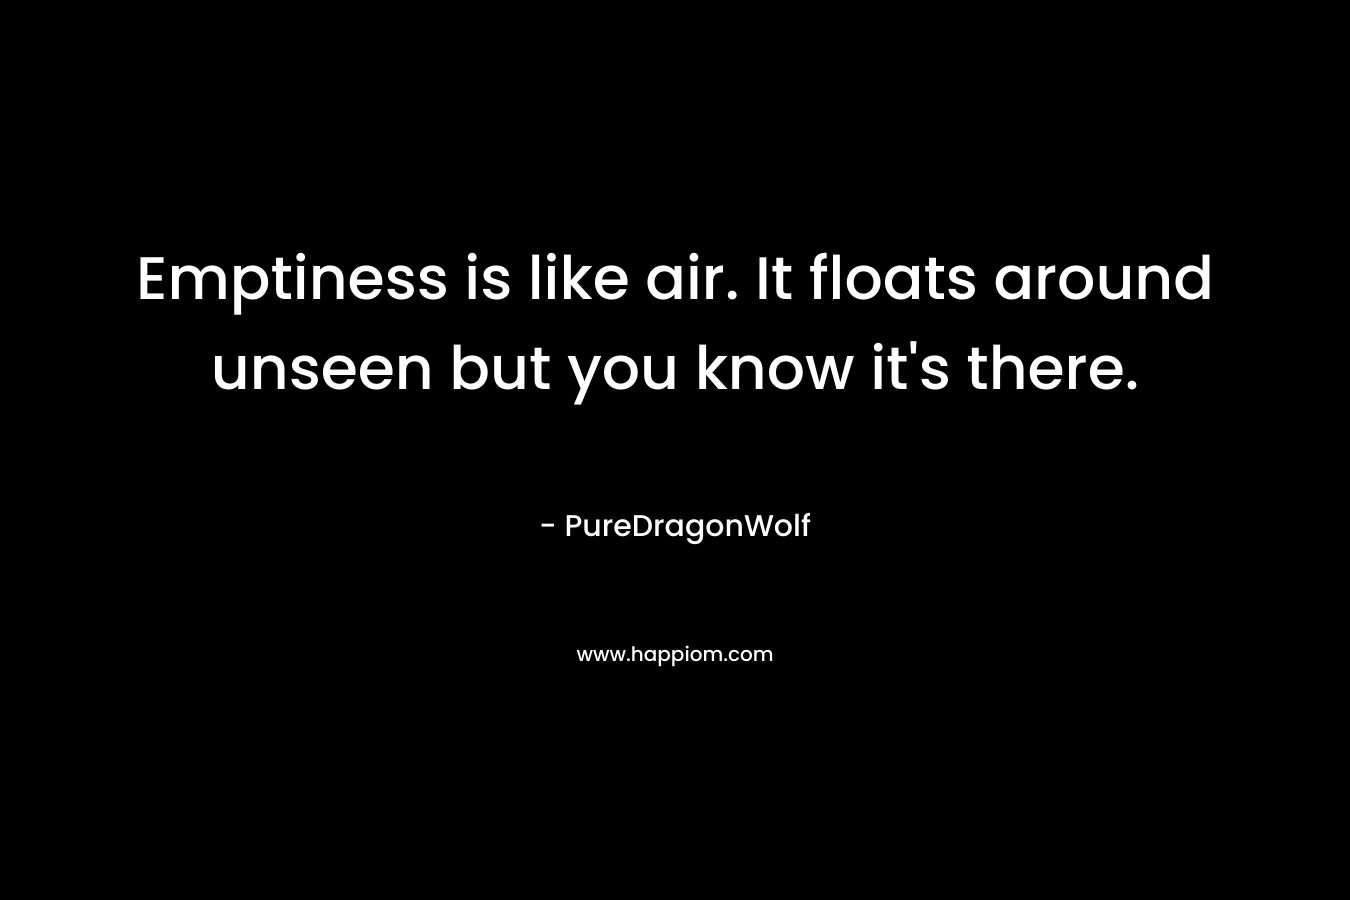 Emptiness is like air. It floats around unseen but you know it’s there. – PureDragonWolf